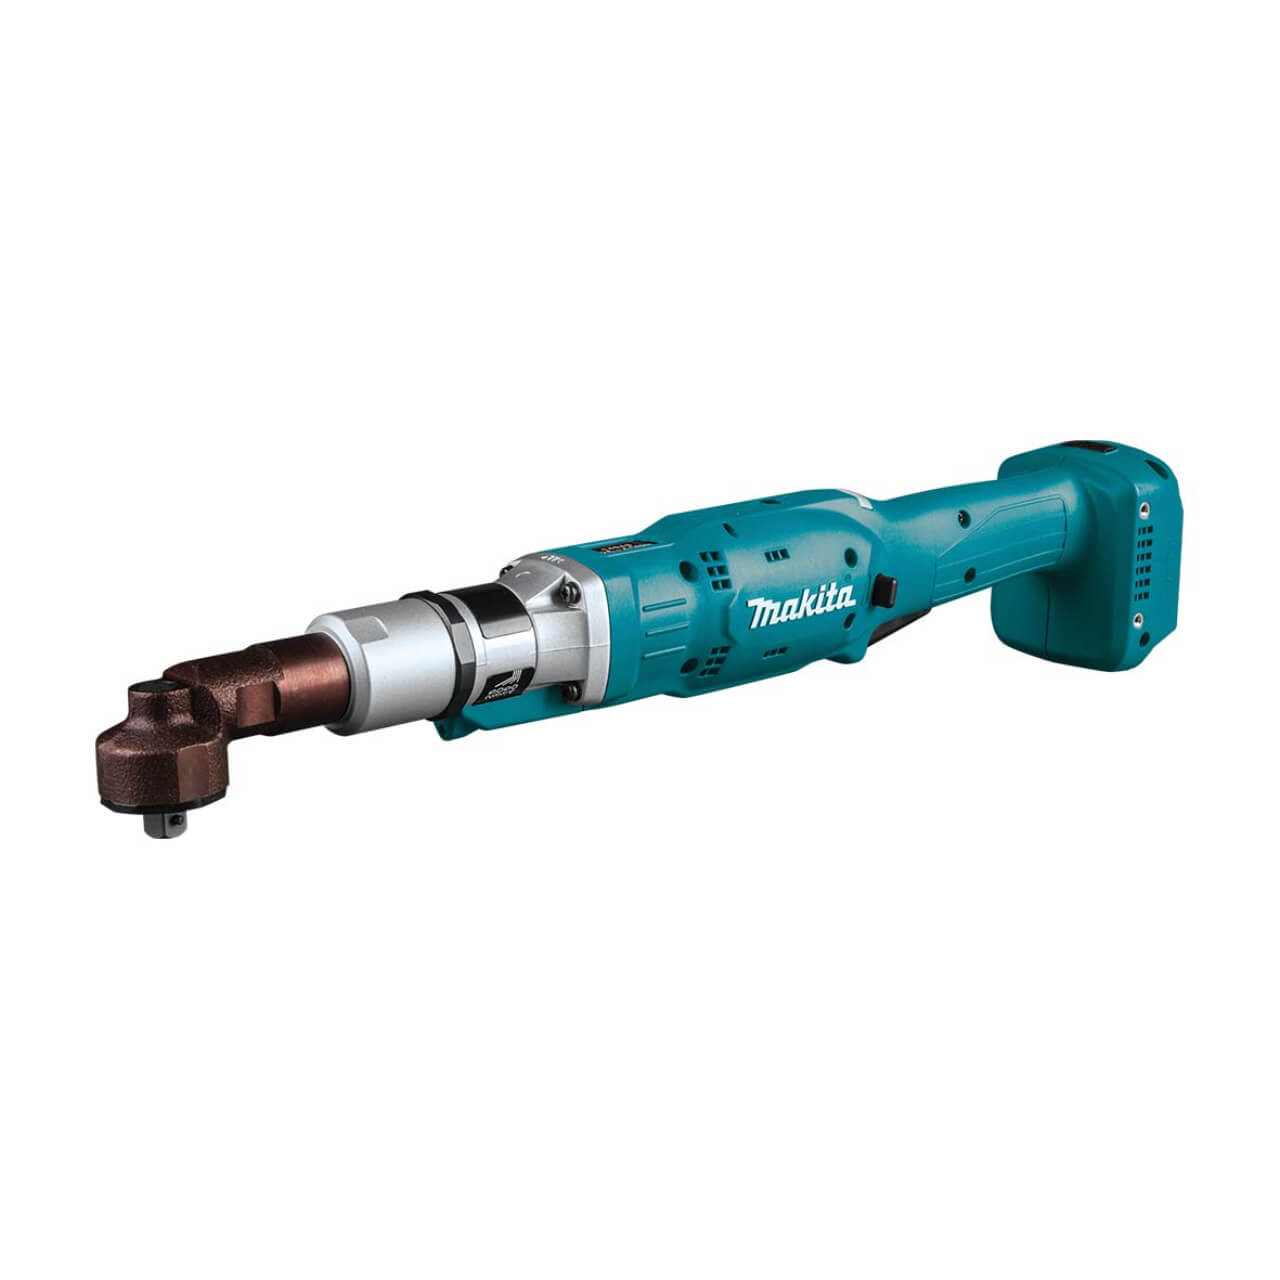 Makita 14.4V BRUSHLESS 3/8” Angled Torque Wrench. 25-40Nm. 50-200rpm - Tool Only